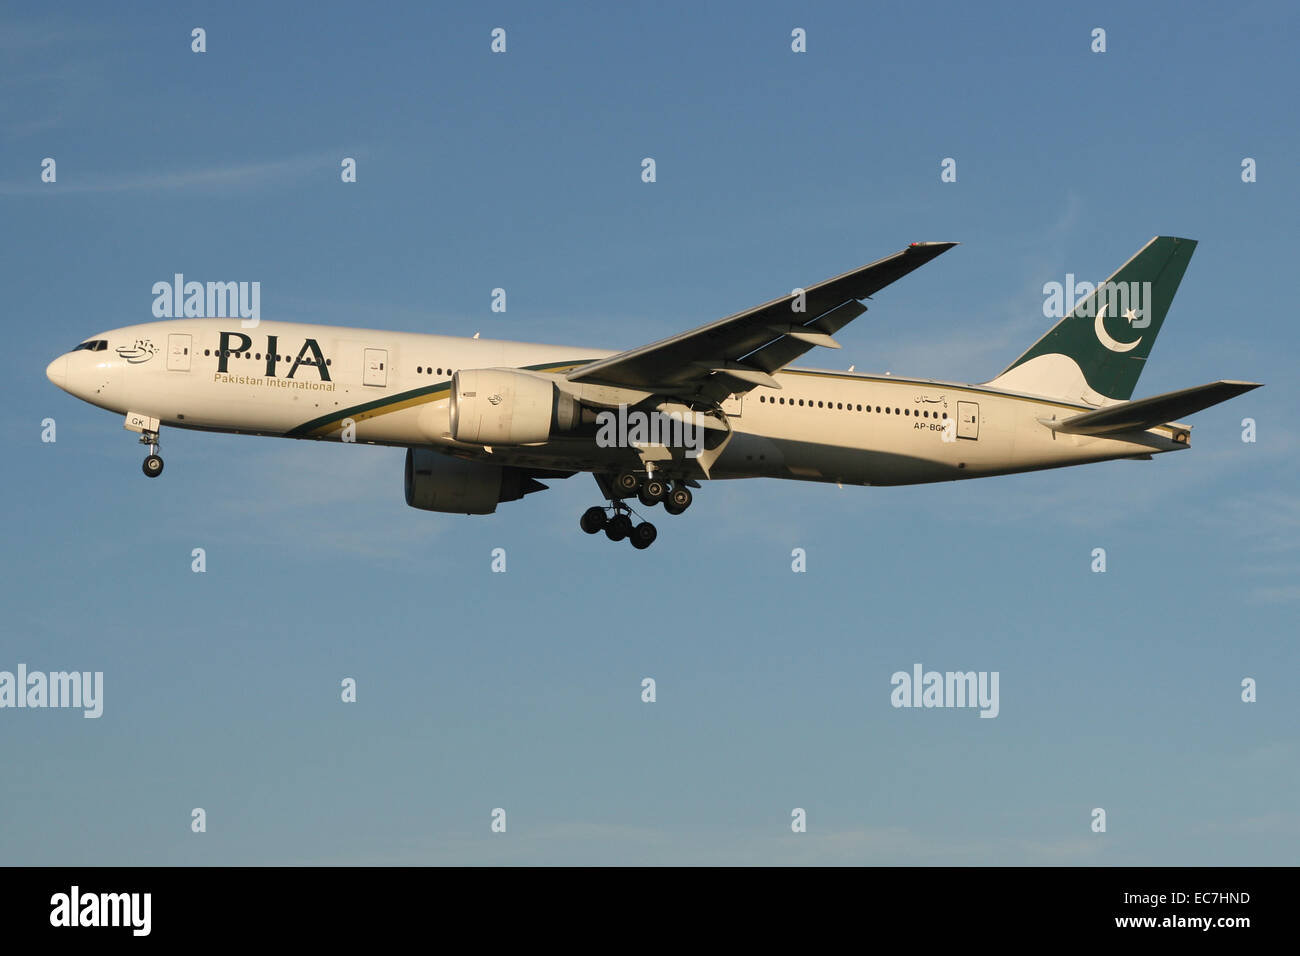 PIA PAKISTAN AIRLINES BOEING 777 200 Stock Photo